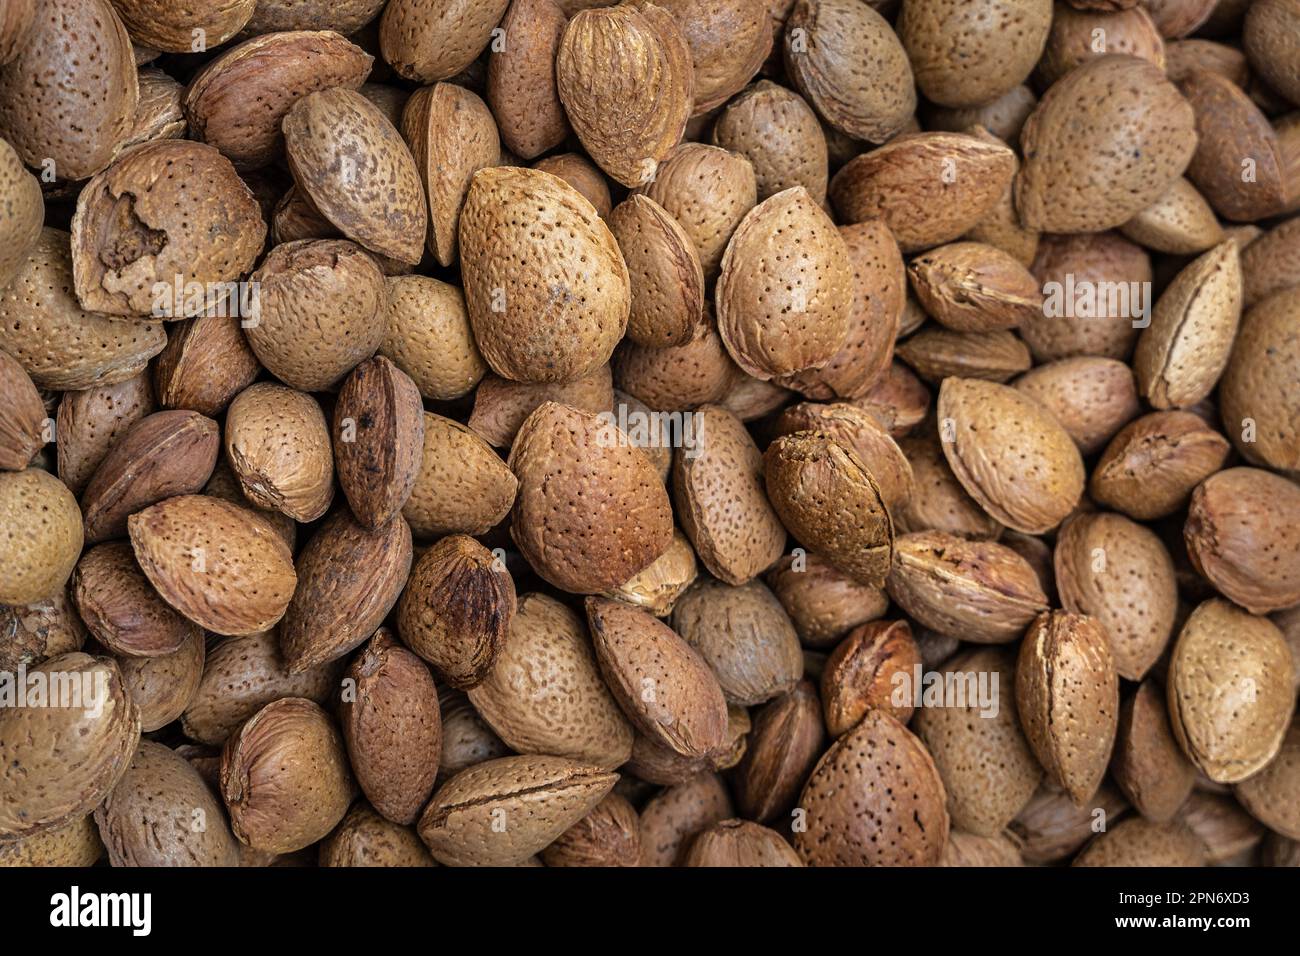 The almond is the edible seed of the almond tree. It is included in the list of traditional Italian food products. Abruzzo, Italy, Europe Stock Photo